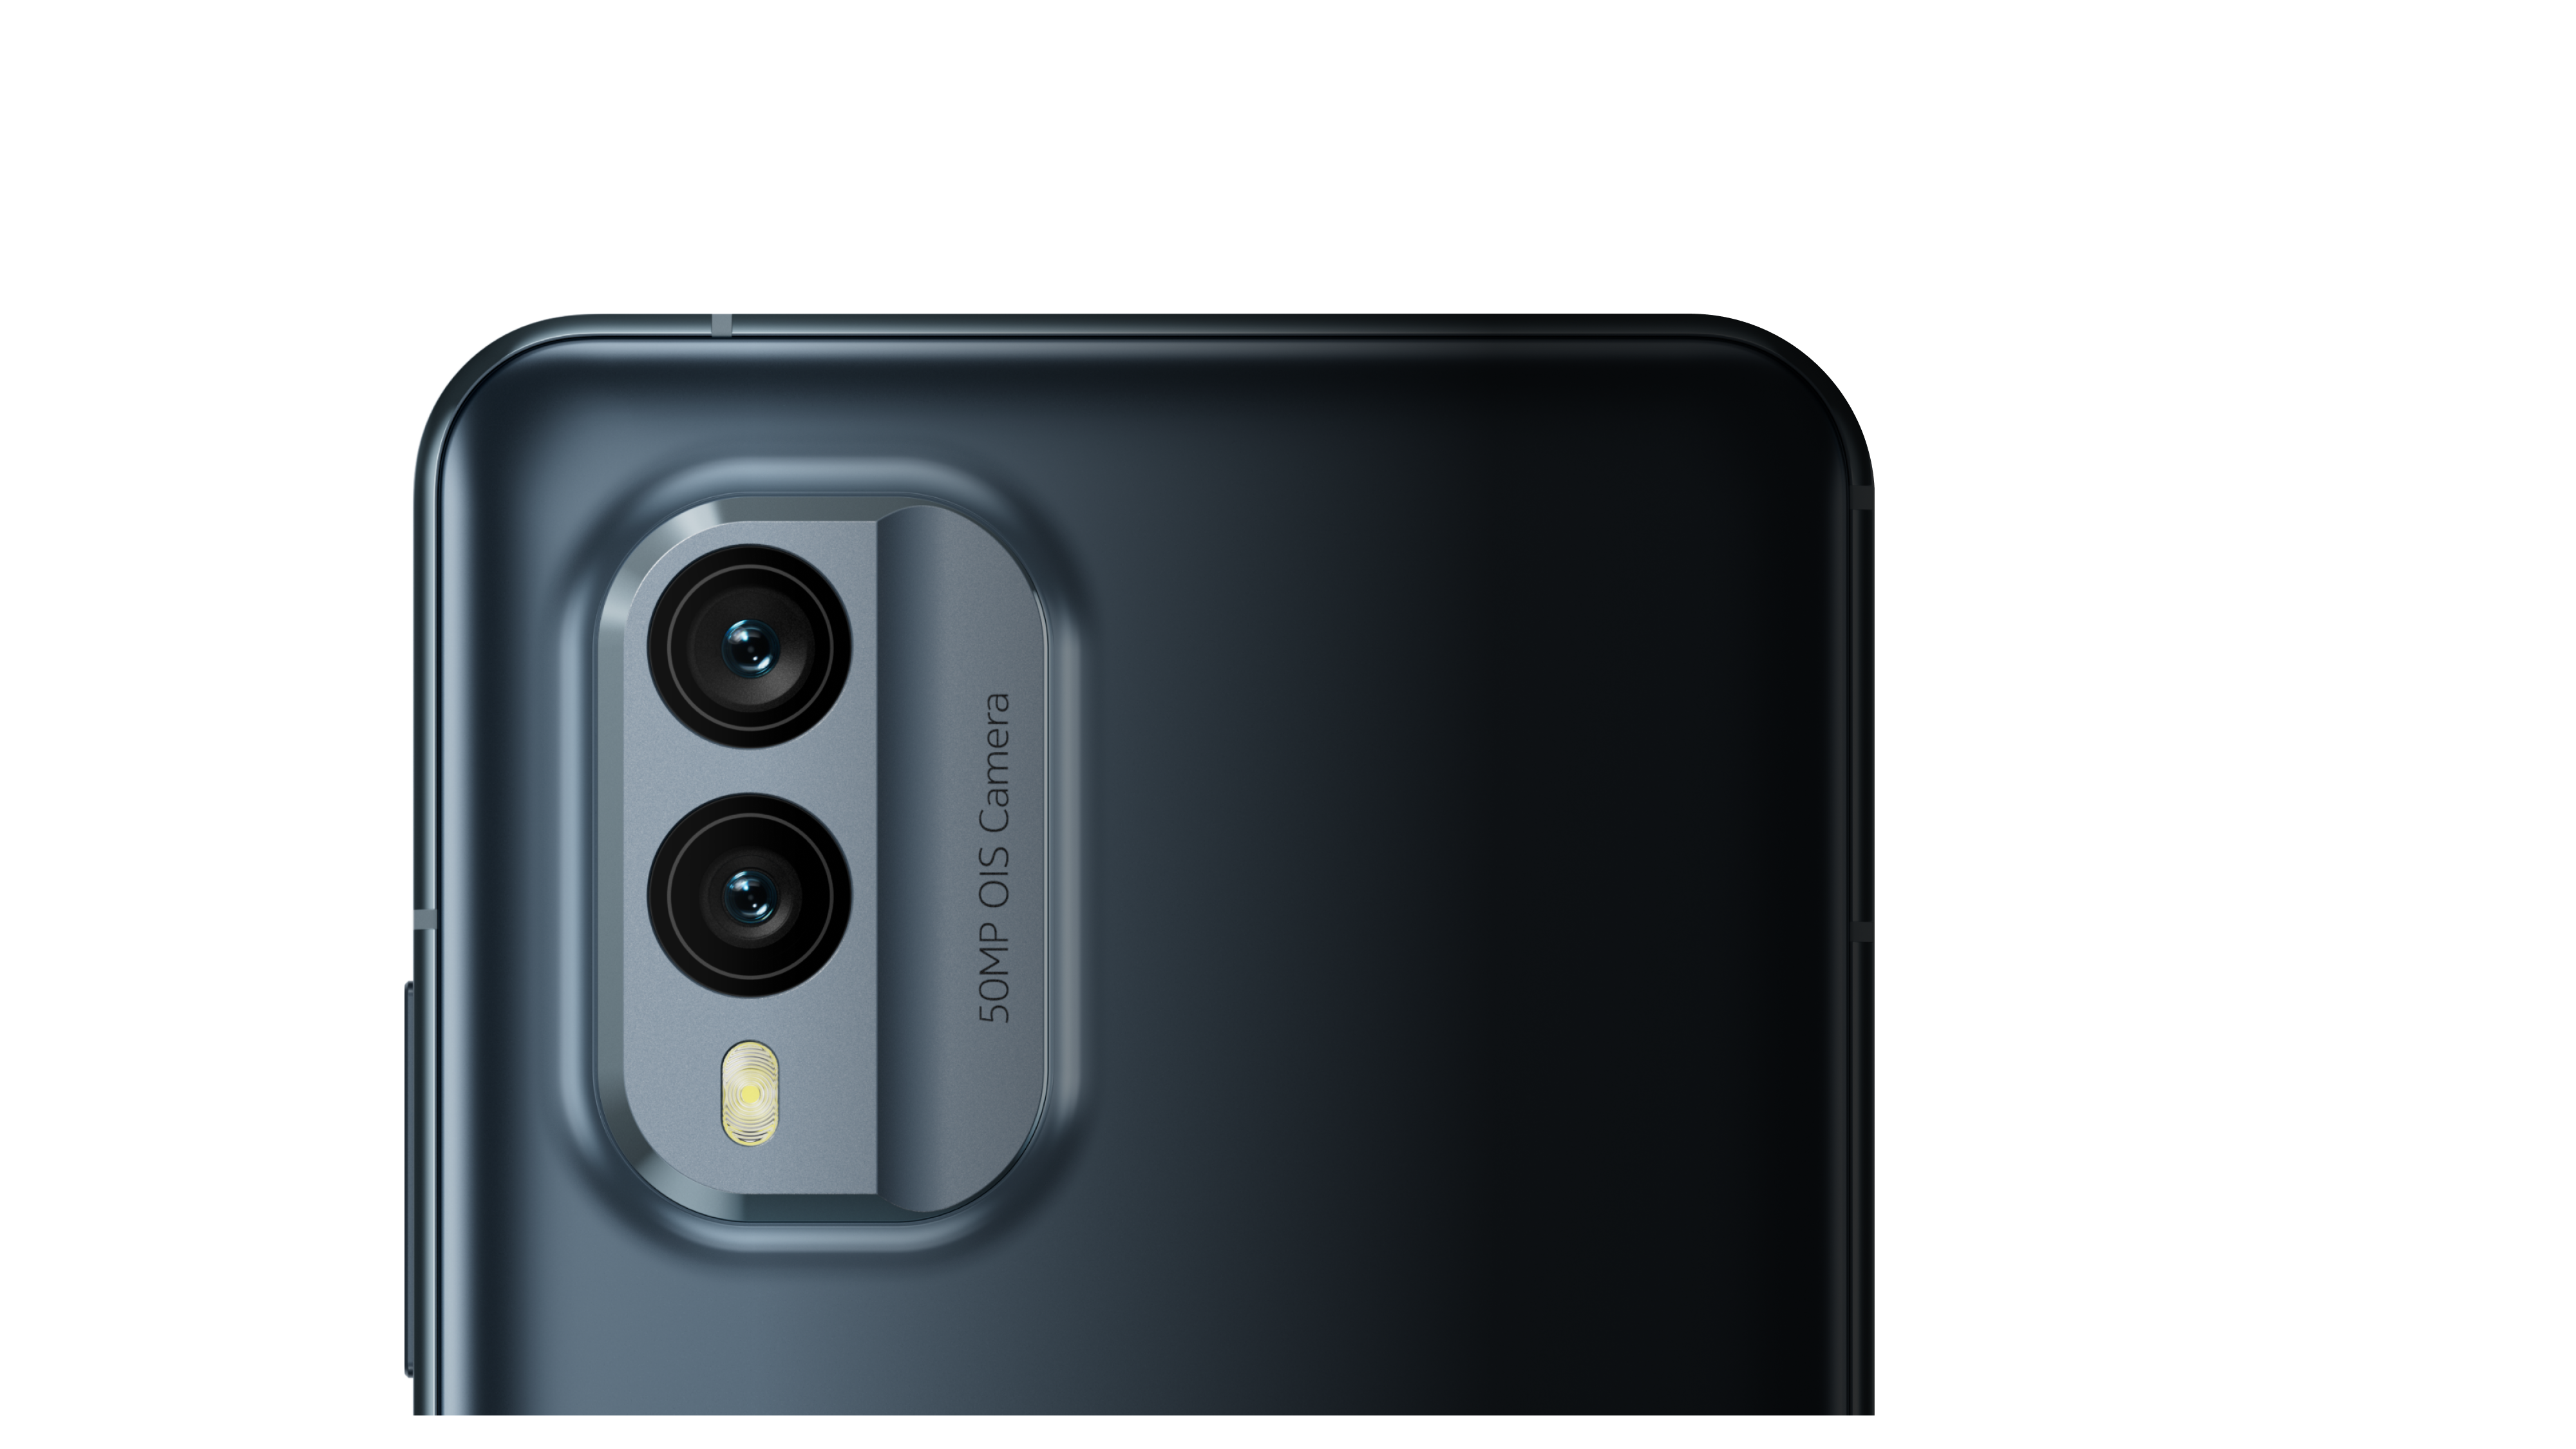 camera X30 OIS 5G sustainable Nokia with smartphone